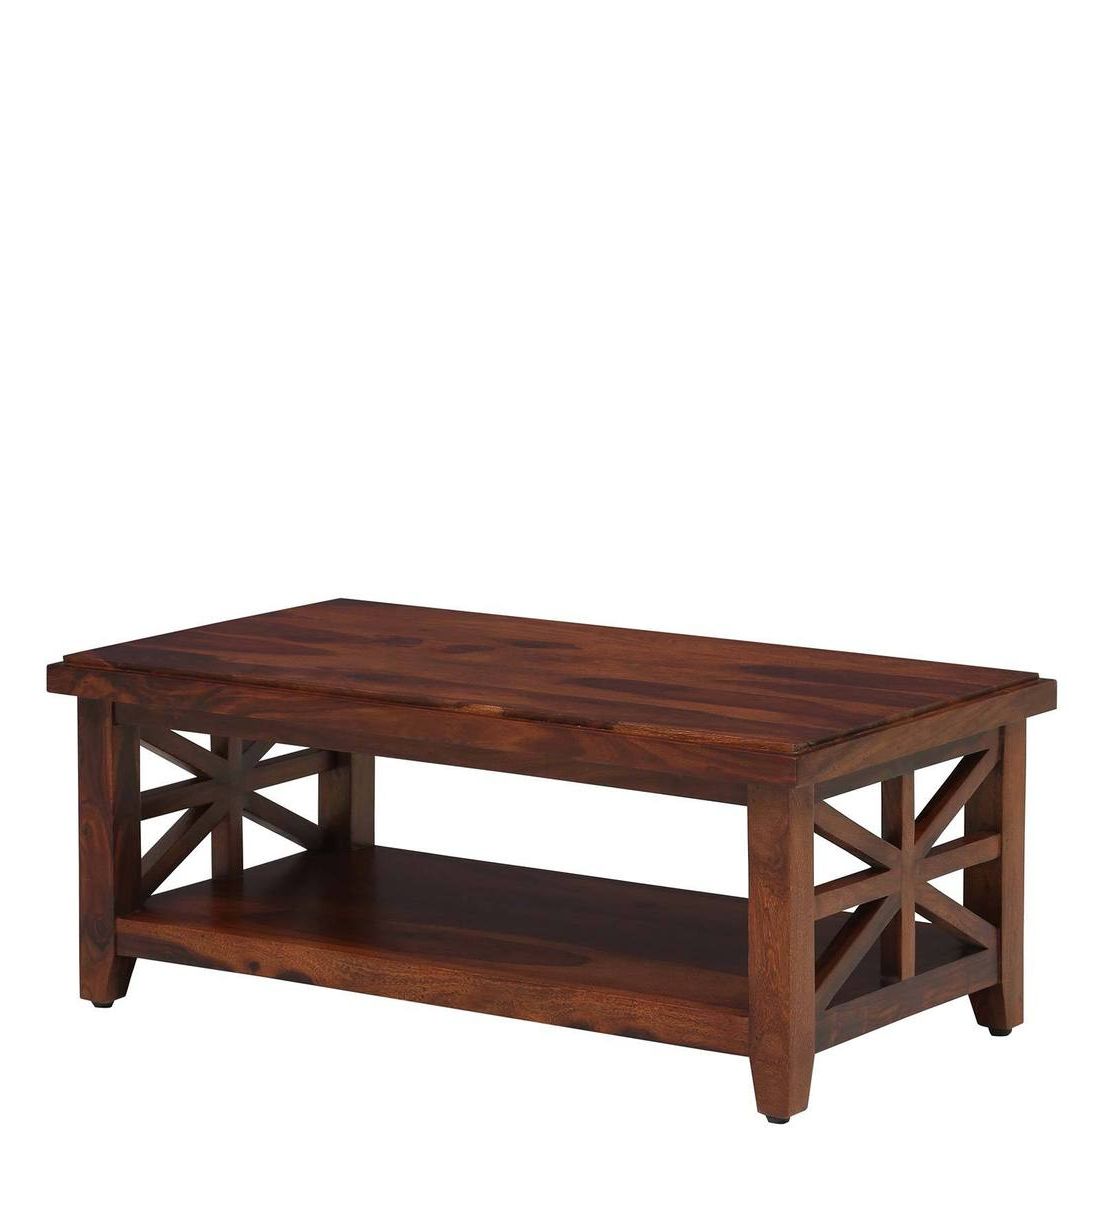 Buy Kodiaq Solid Wood Coffee Table In Honey Oak Finish – Woodsworth Within Latest Honey Oak And Marble Coffee Tables (View 6 of 10)